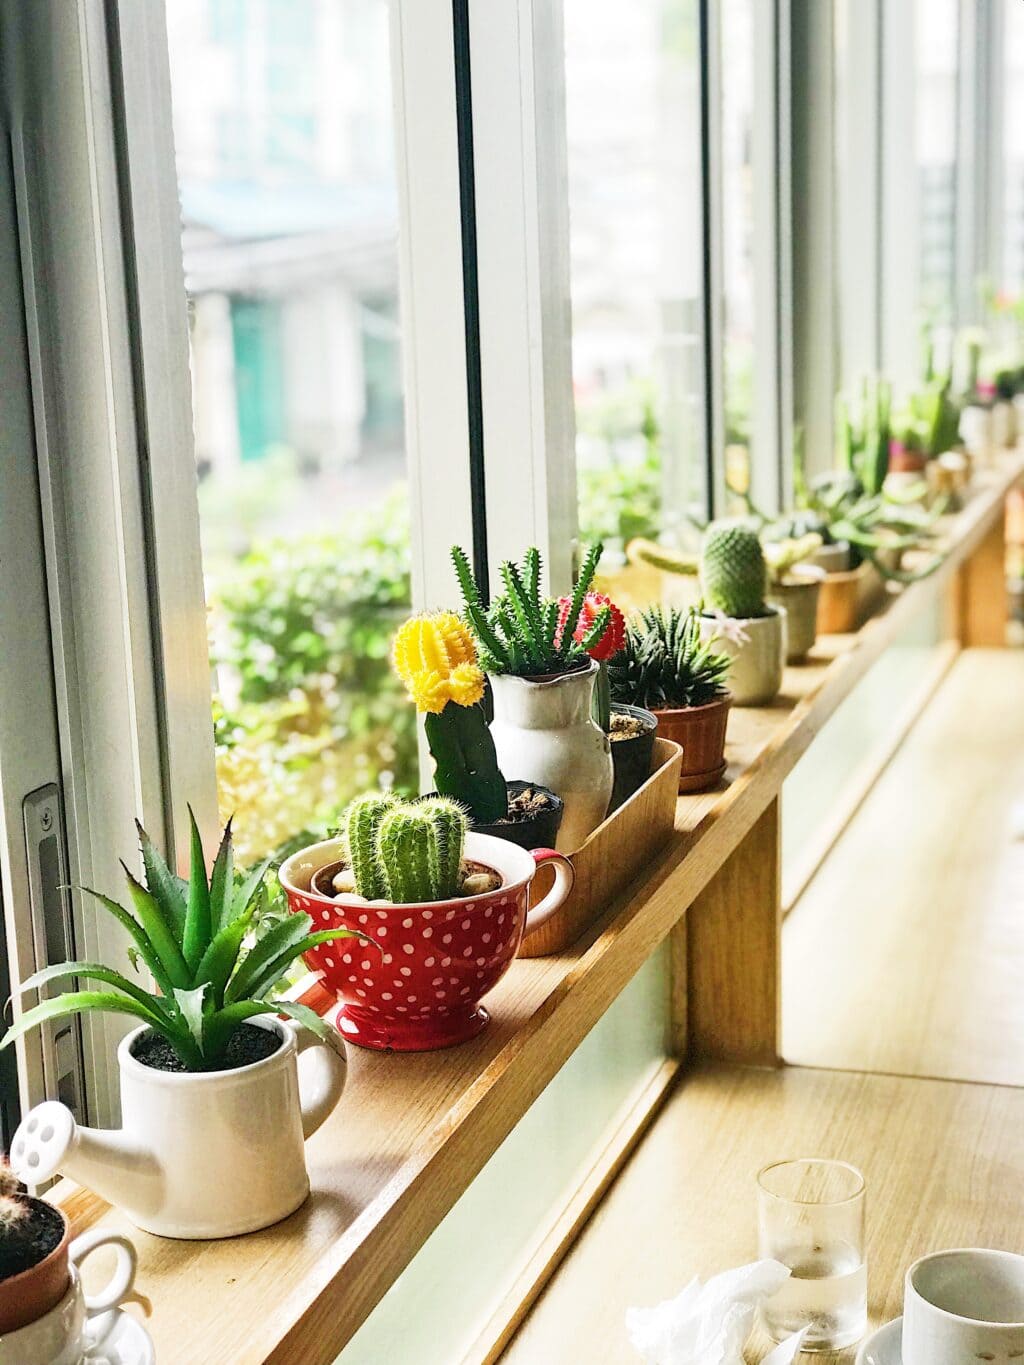 plants lined up in the window soaking up the sun